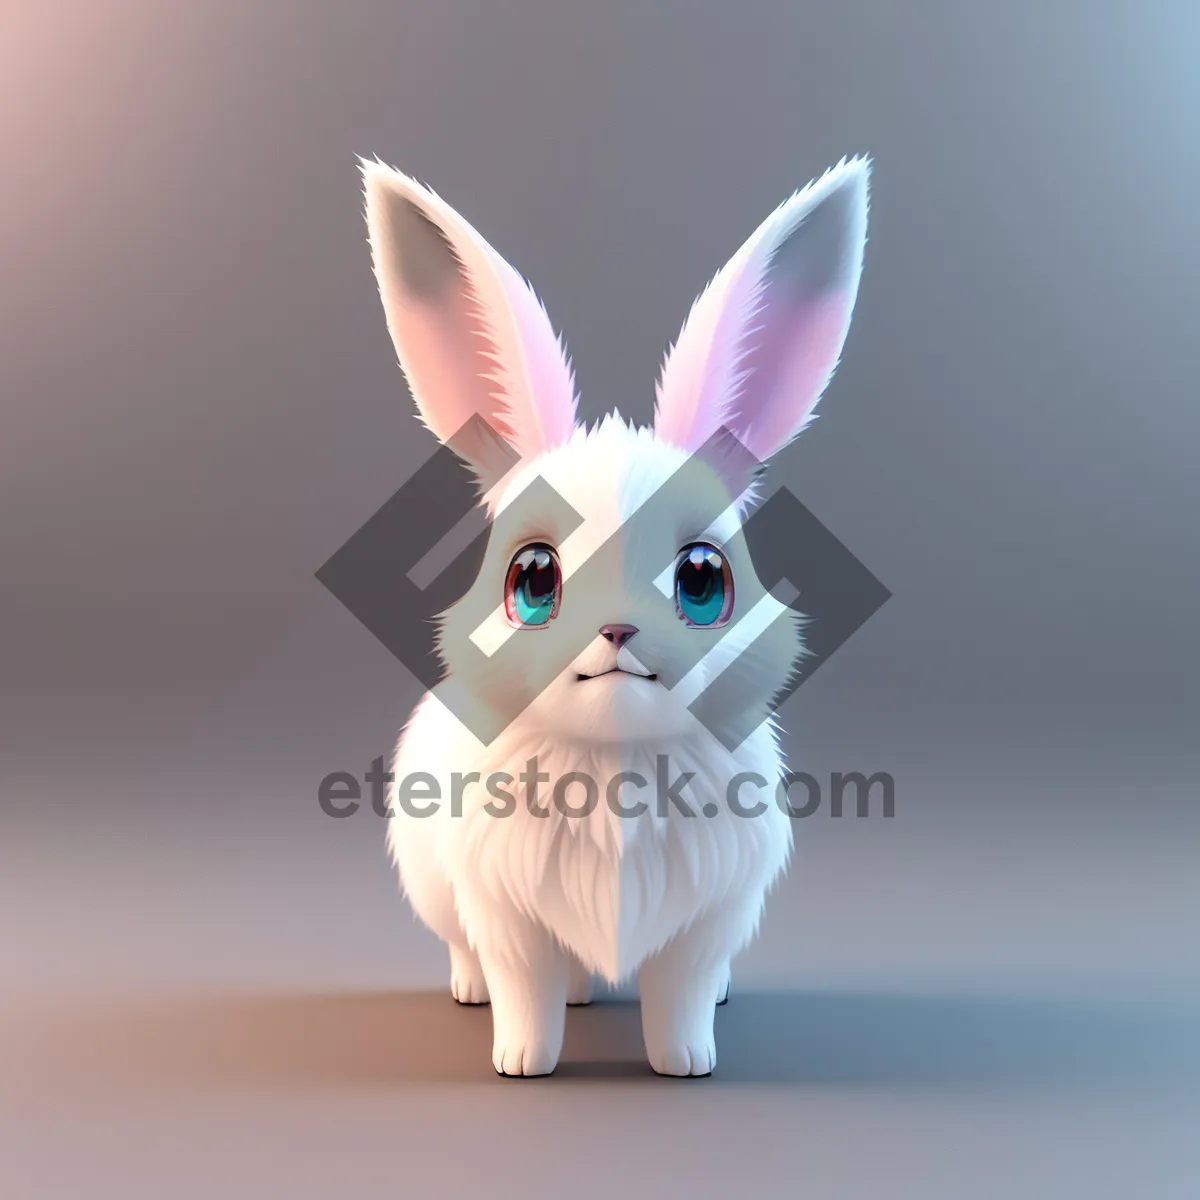 Picture of Cute Bunny with Fluffy Ears Sitting and Looking Adorable